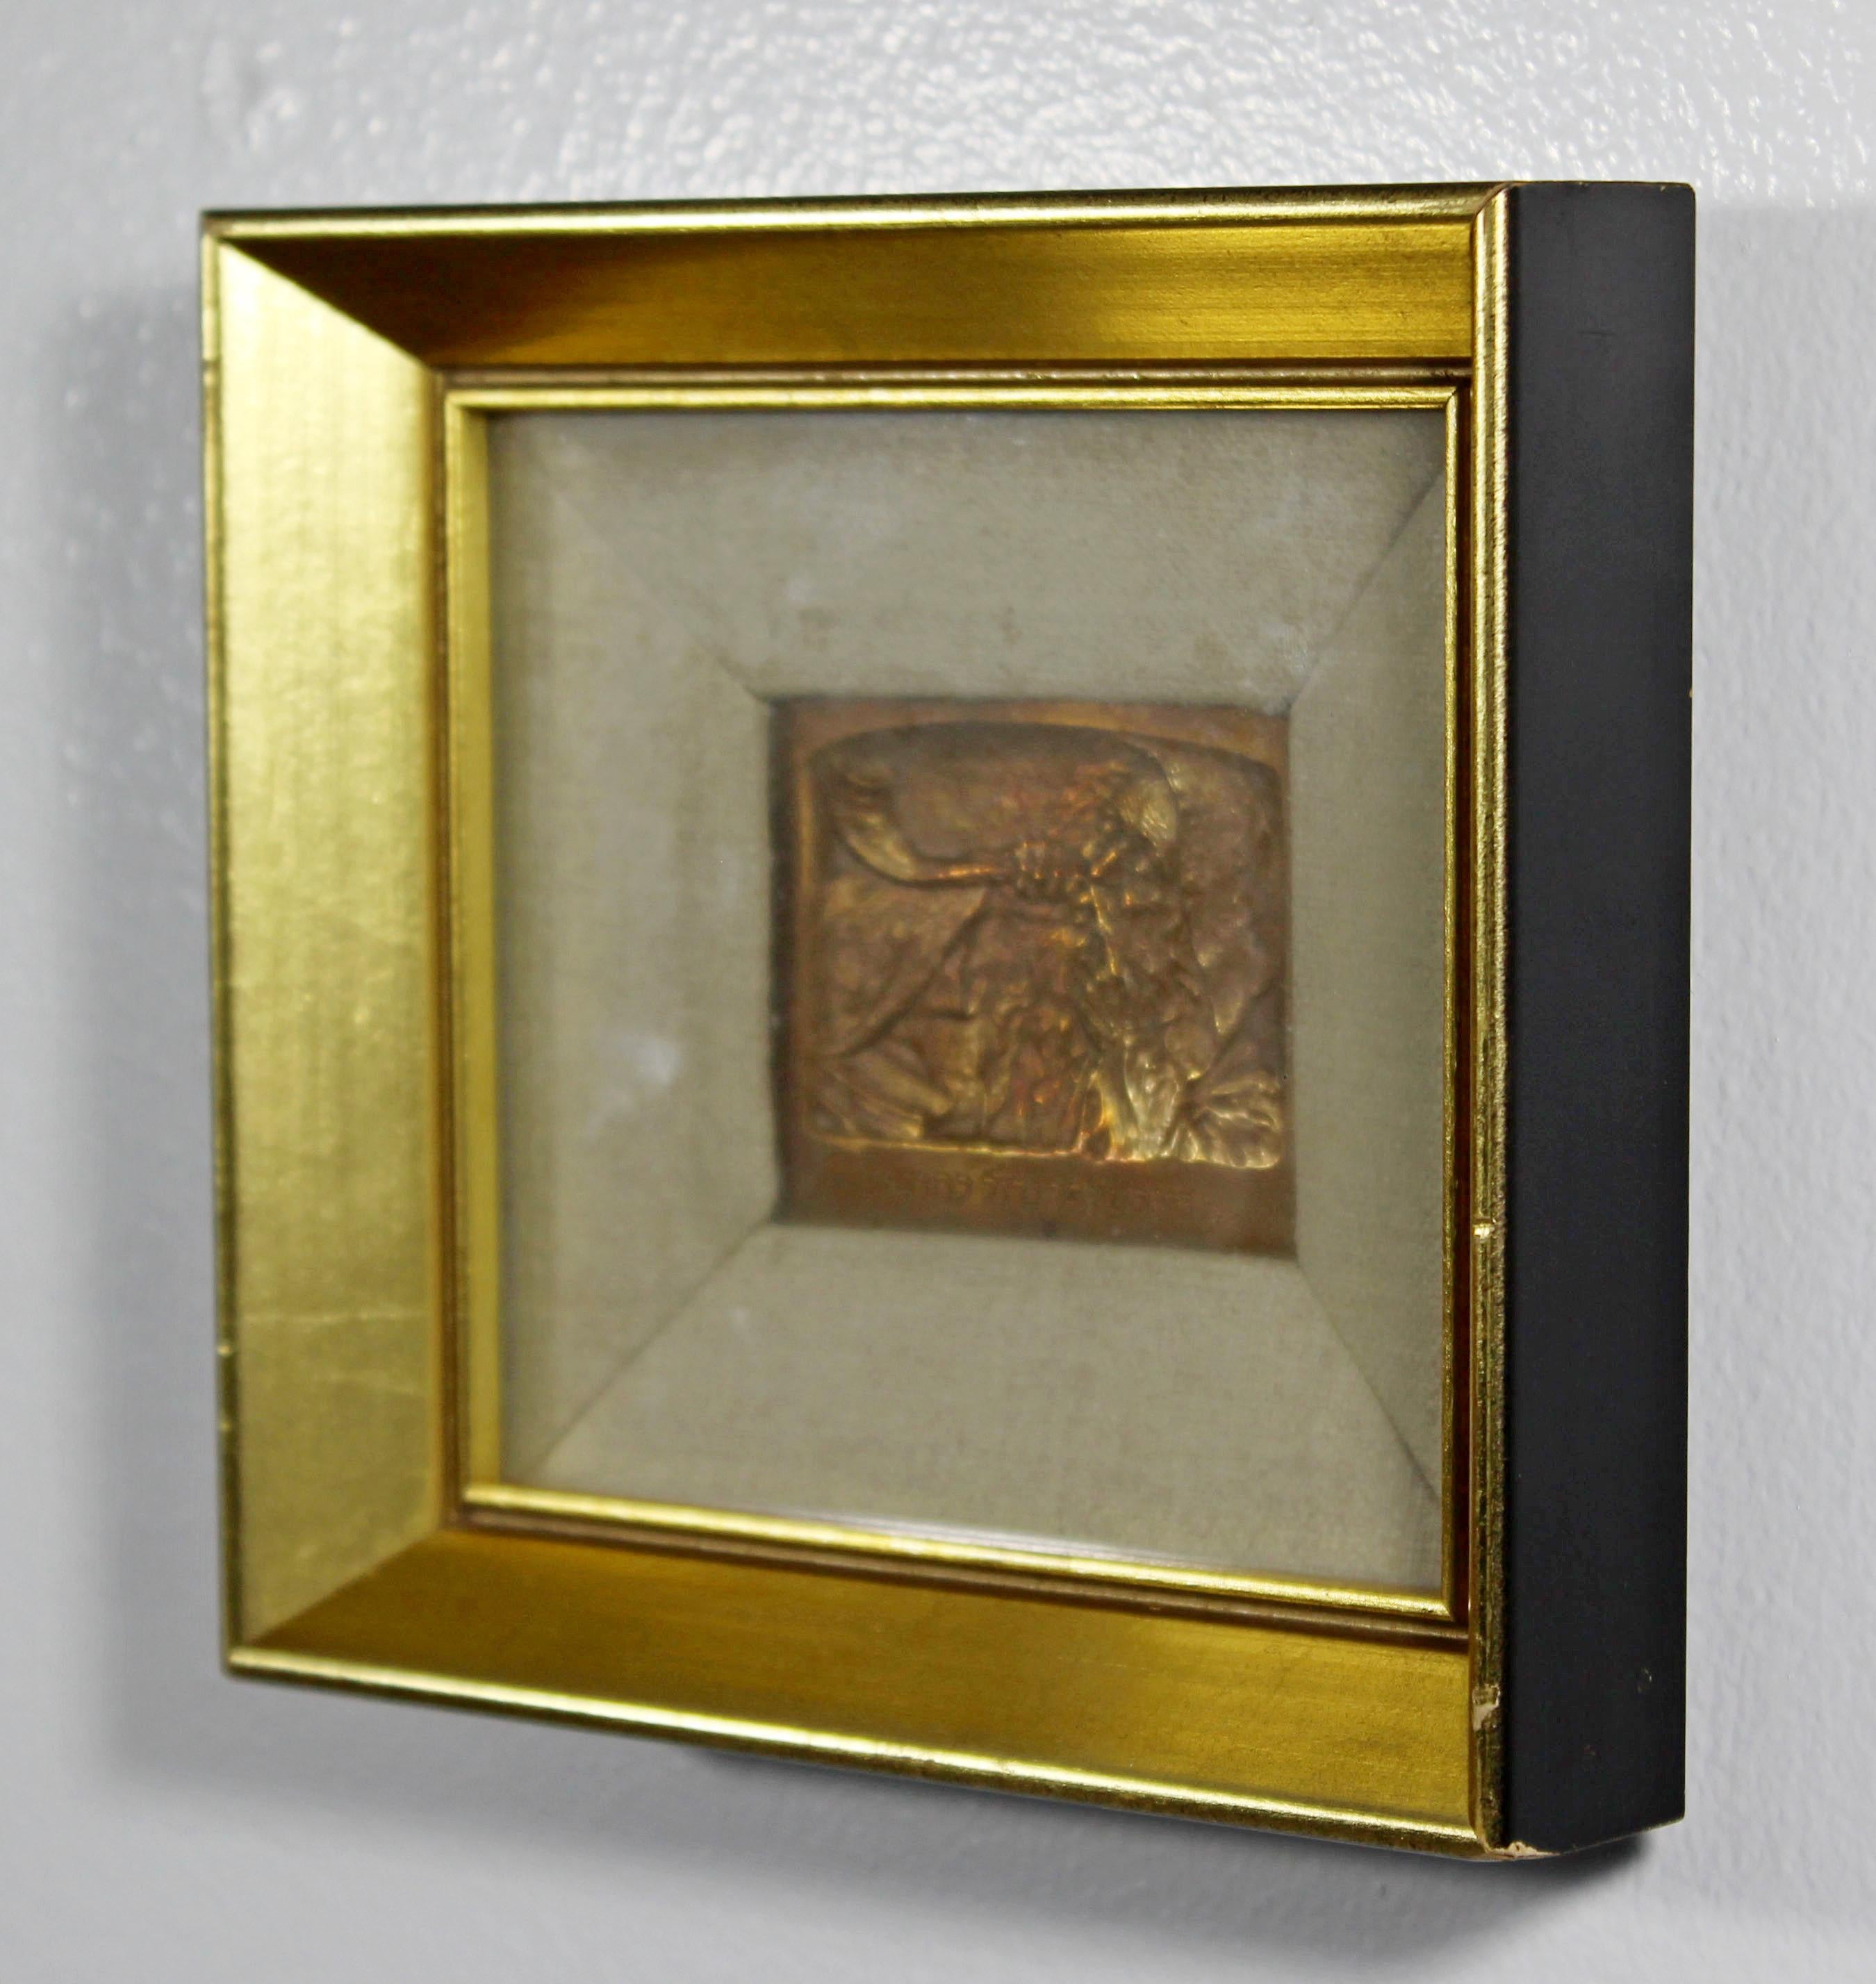 For your consideration is a stunning, framed, bronze relief wall sculpture, by Boris Schatz, entitled 